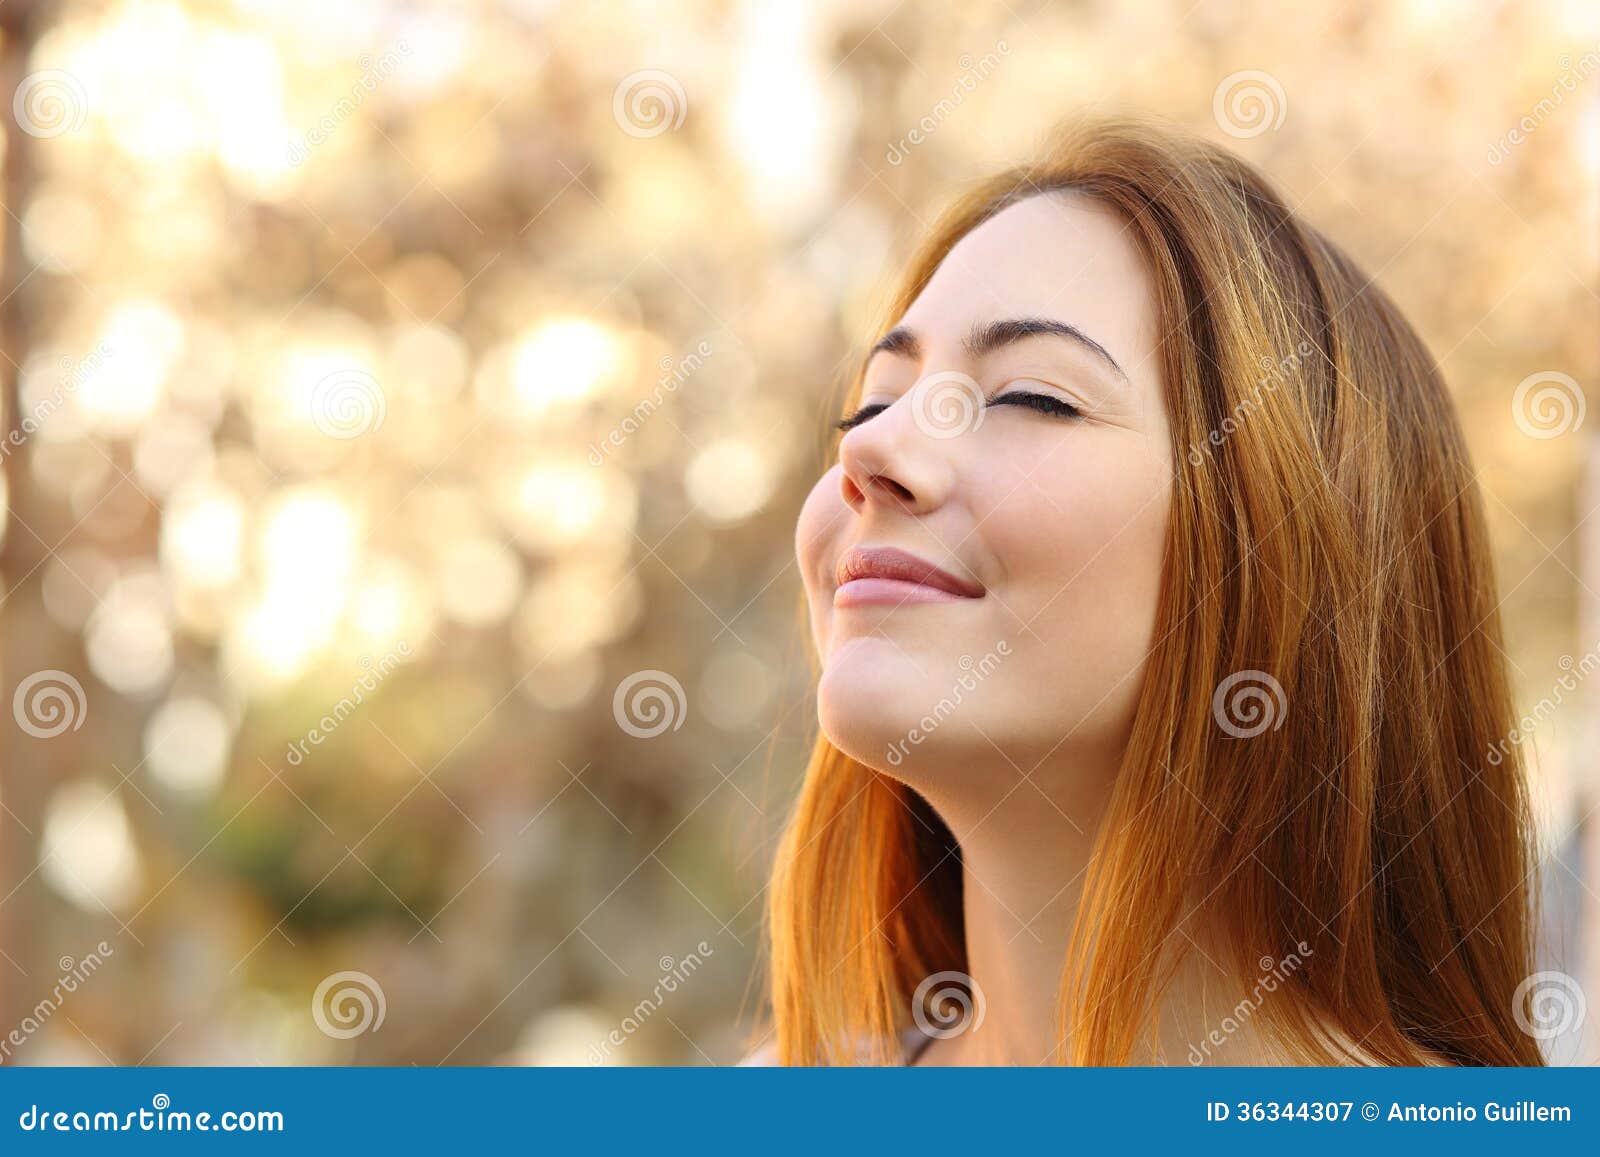 beautiful woman doing breath exercises with an autumn background